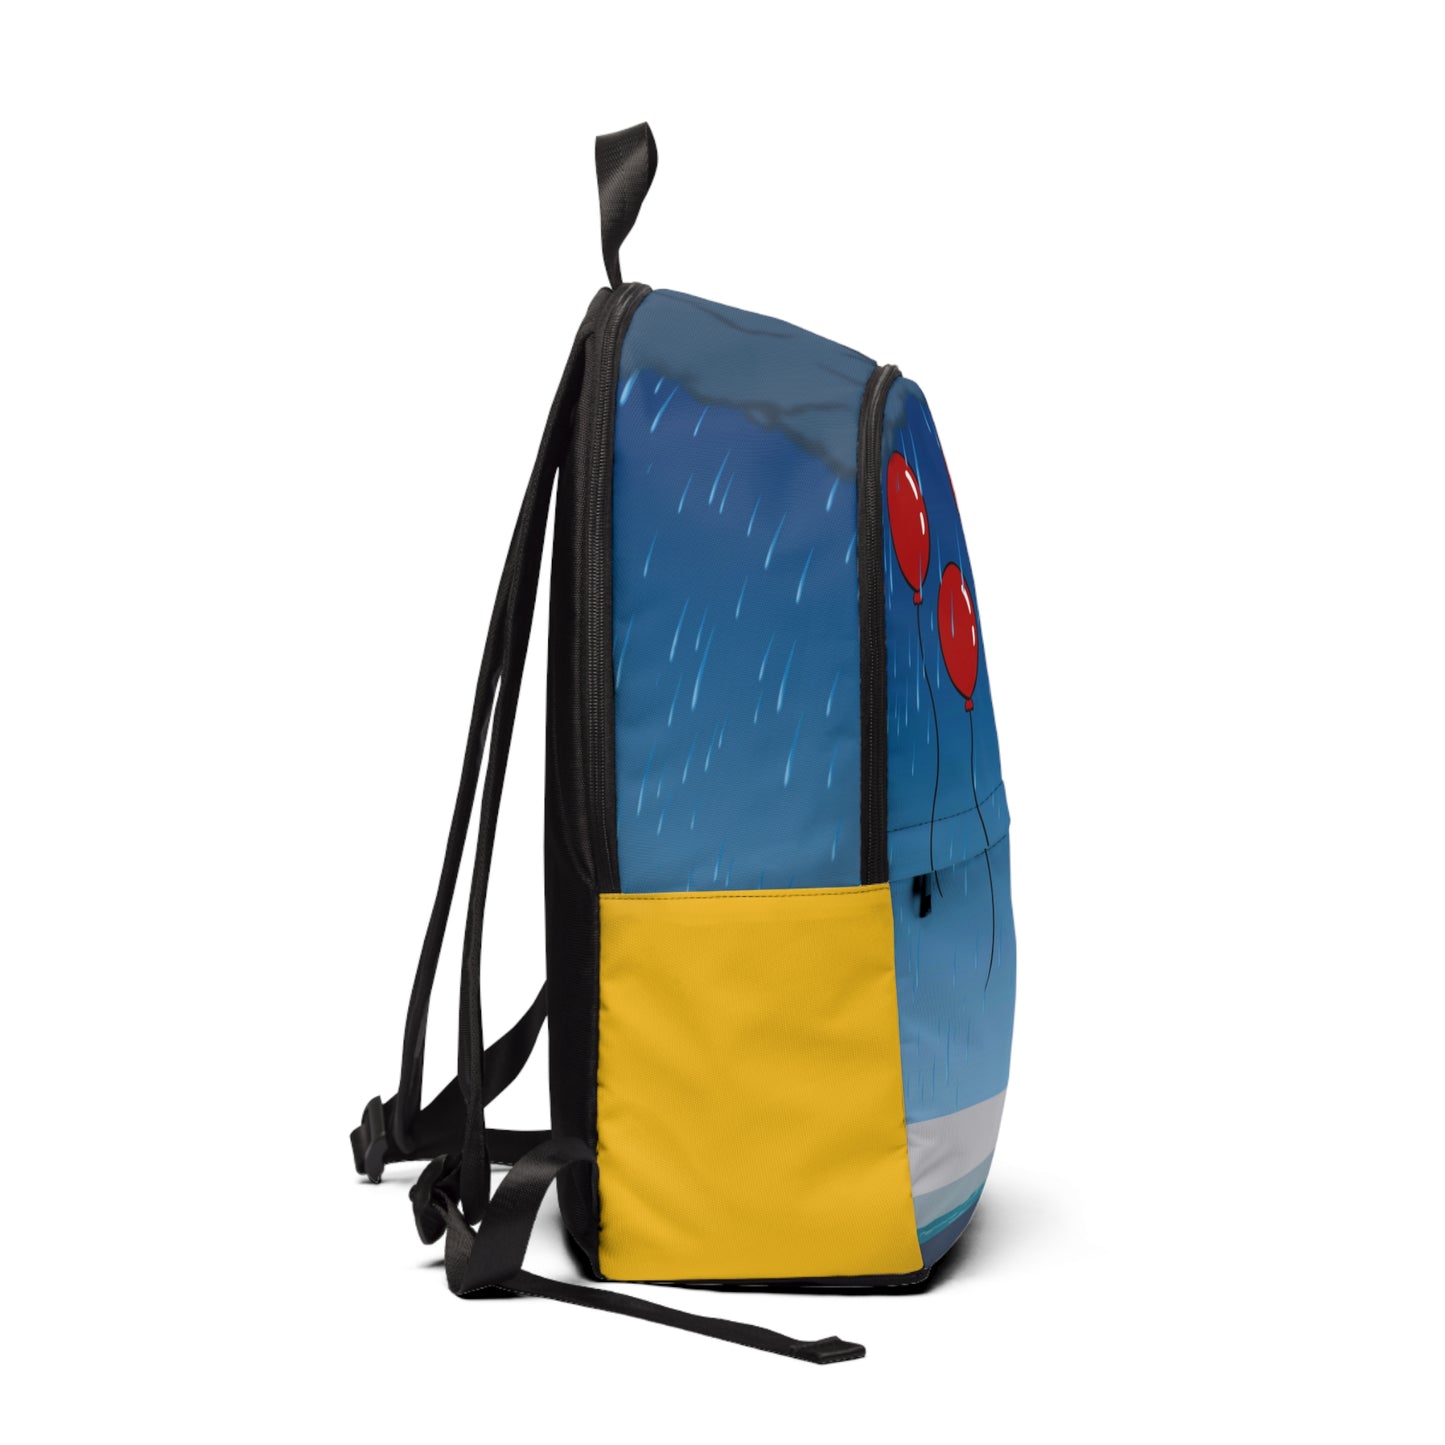 Float on Over Fabric Backpack